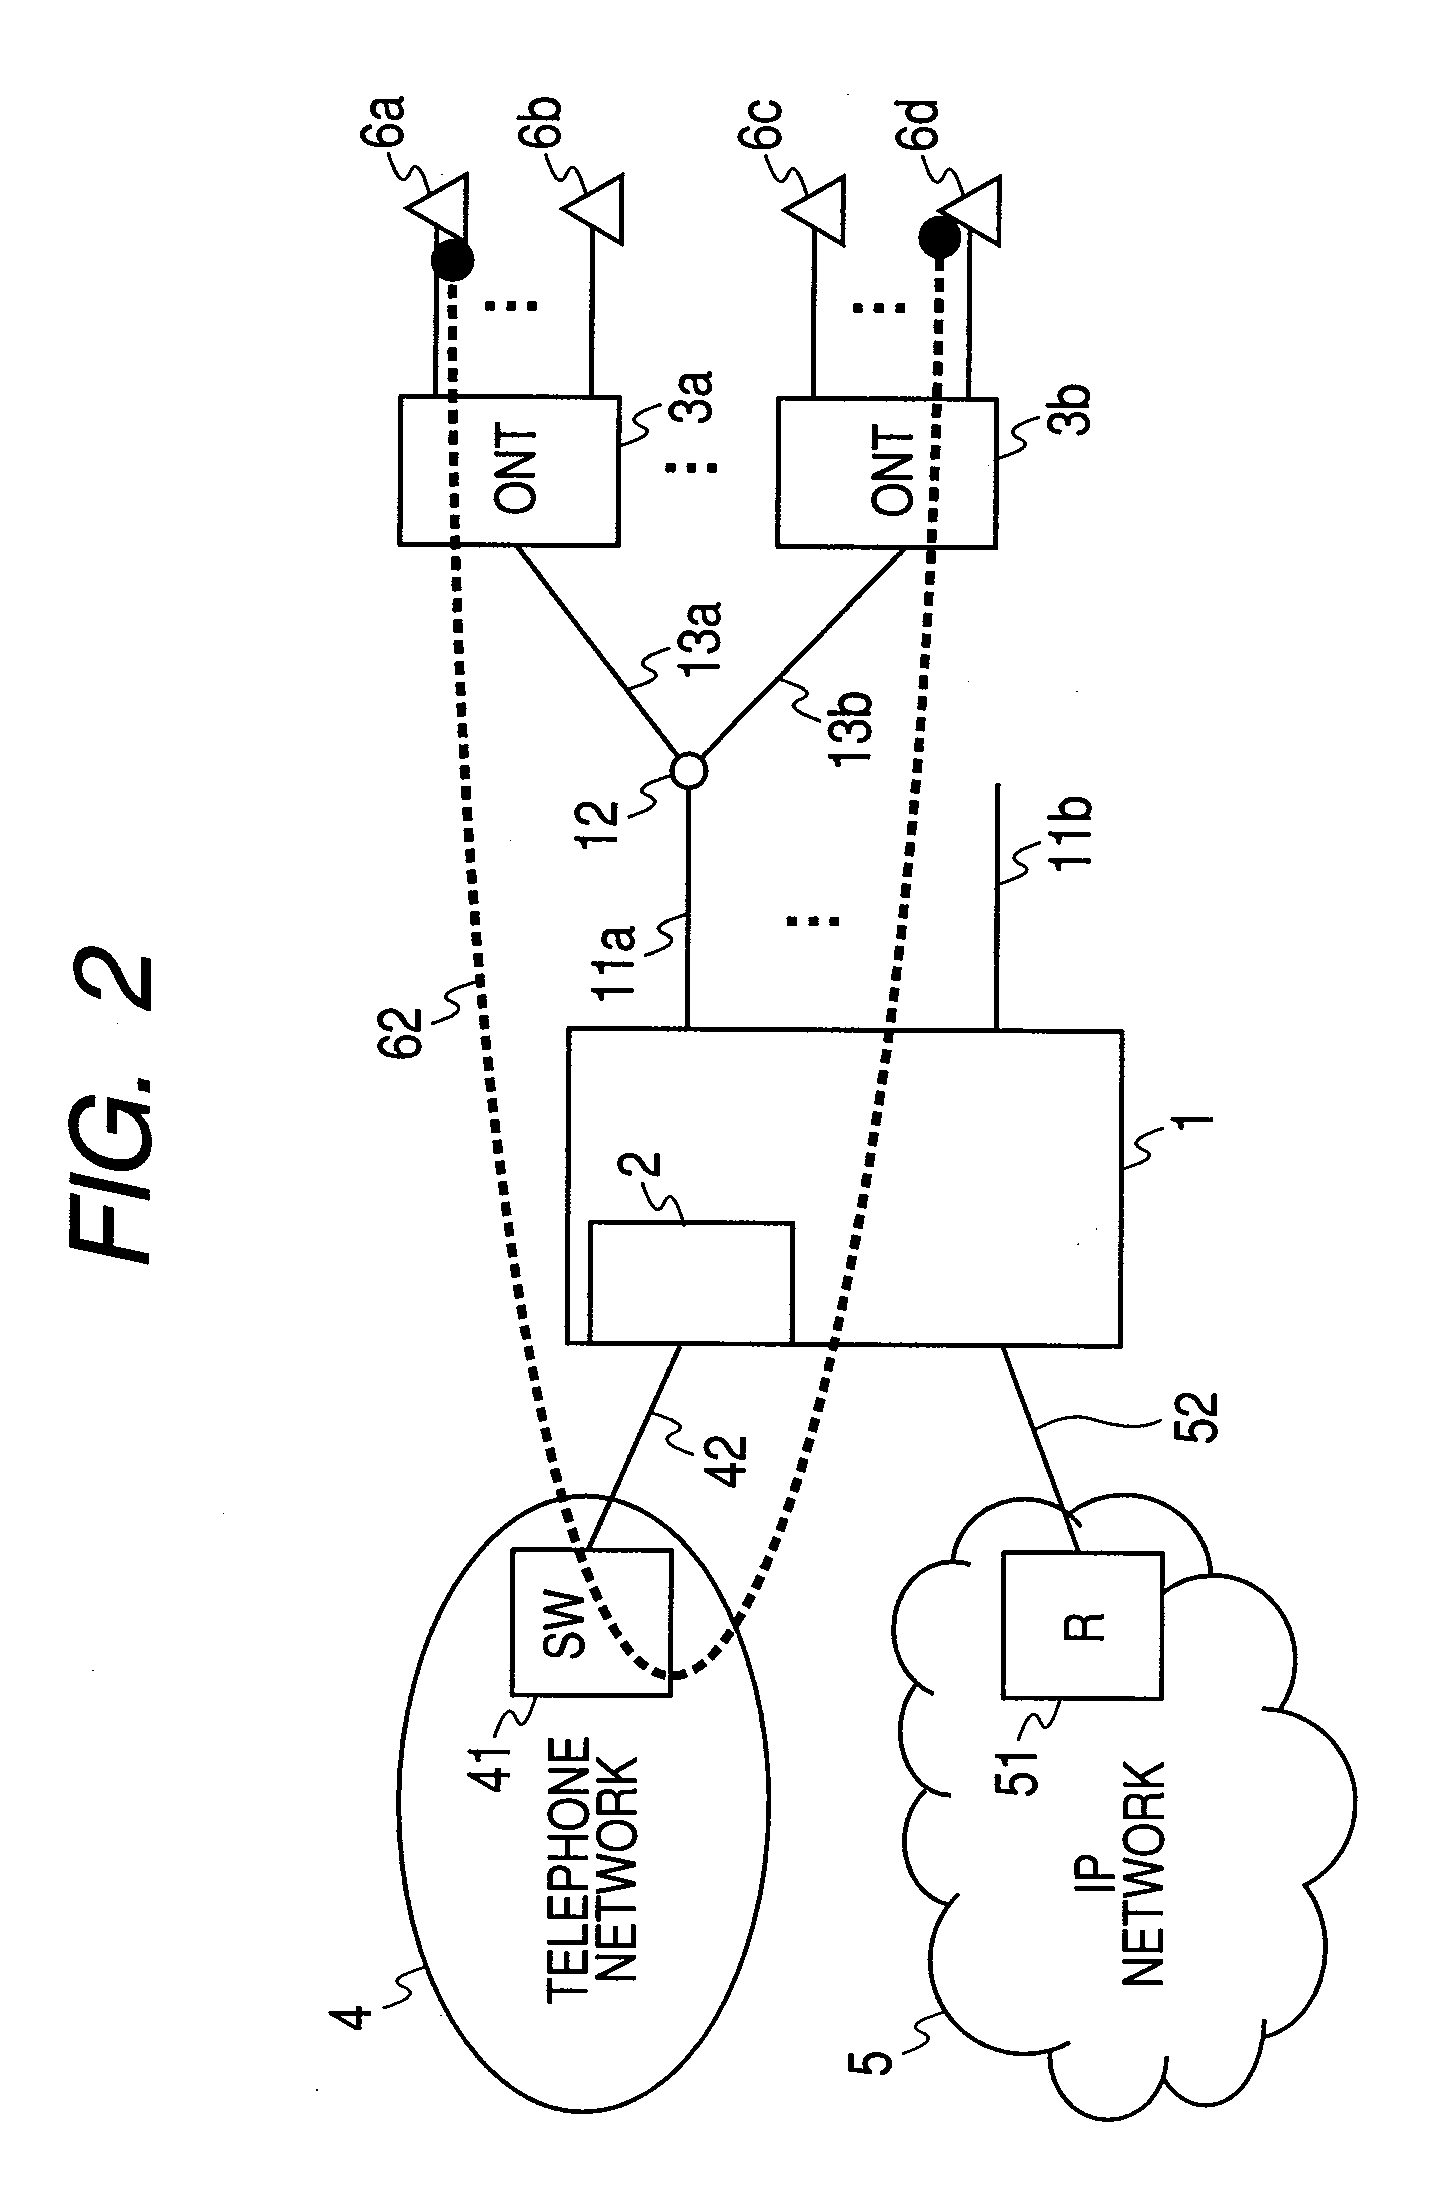 Gateway device, optical network terminal, and passive optical network system